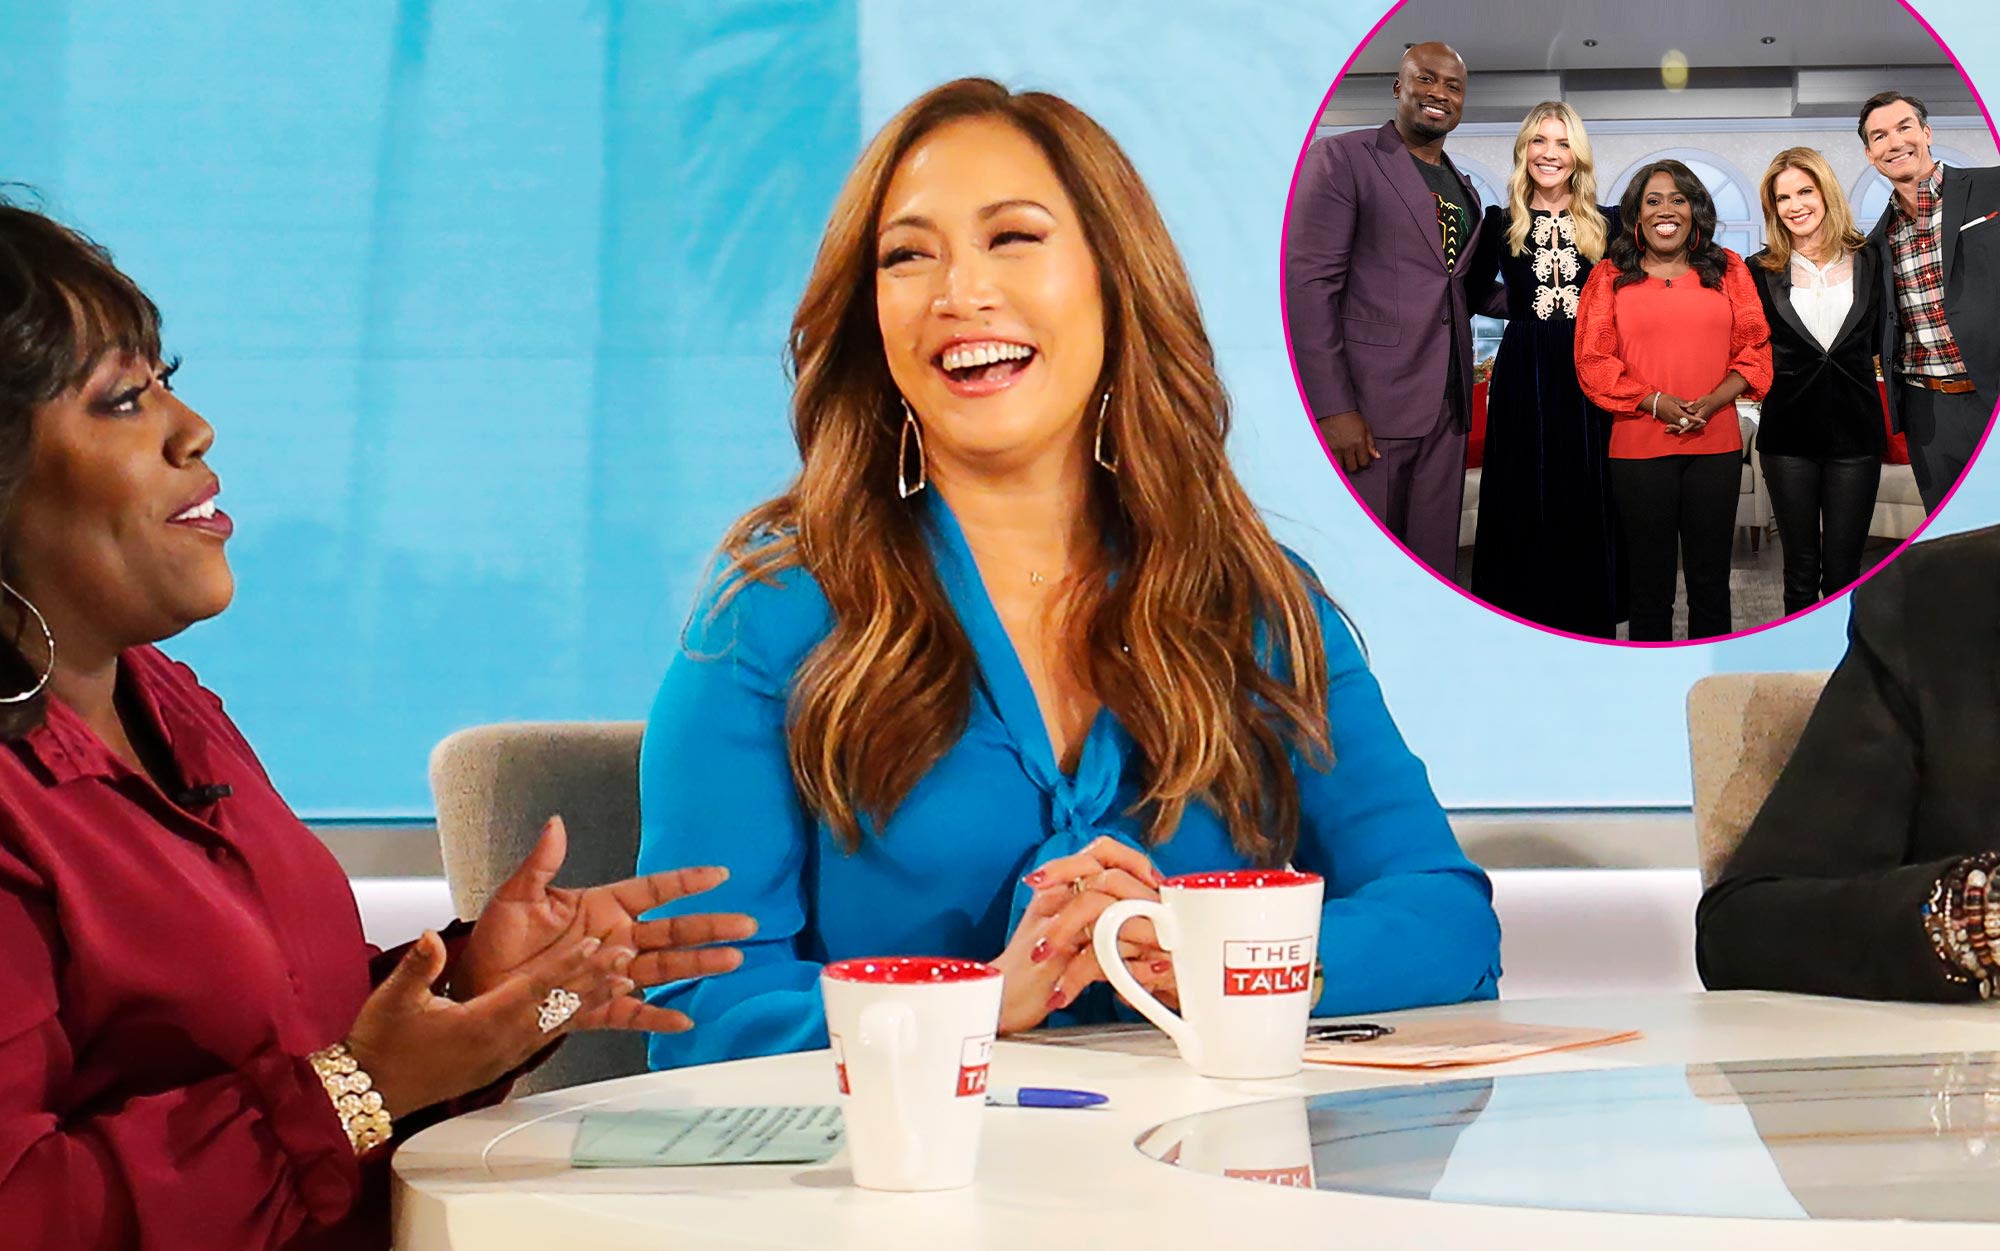 Carrie Ann Inaba Reacts to ‘The Talk’ Ending After 15 Seasons: ‘I’m Sad It’s Going’